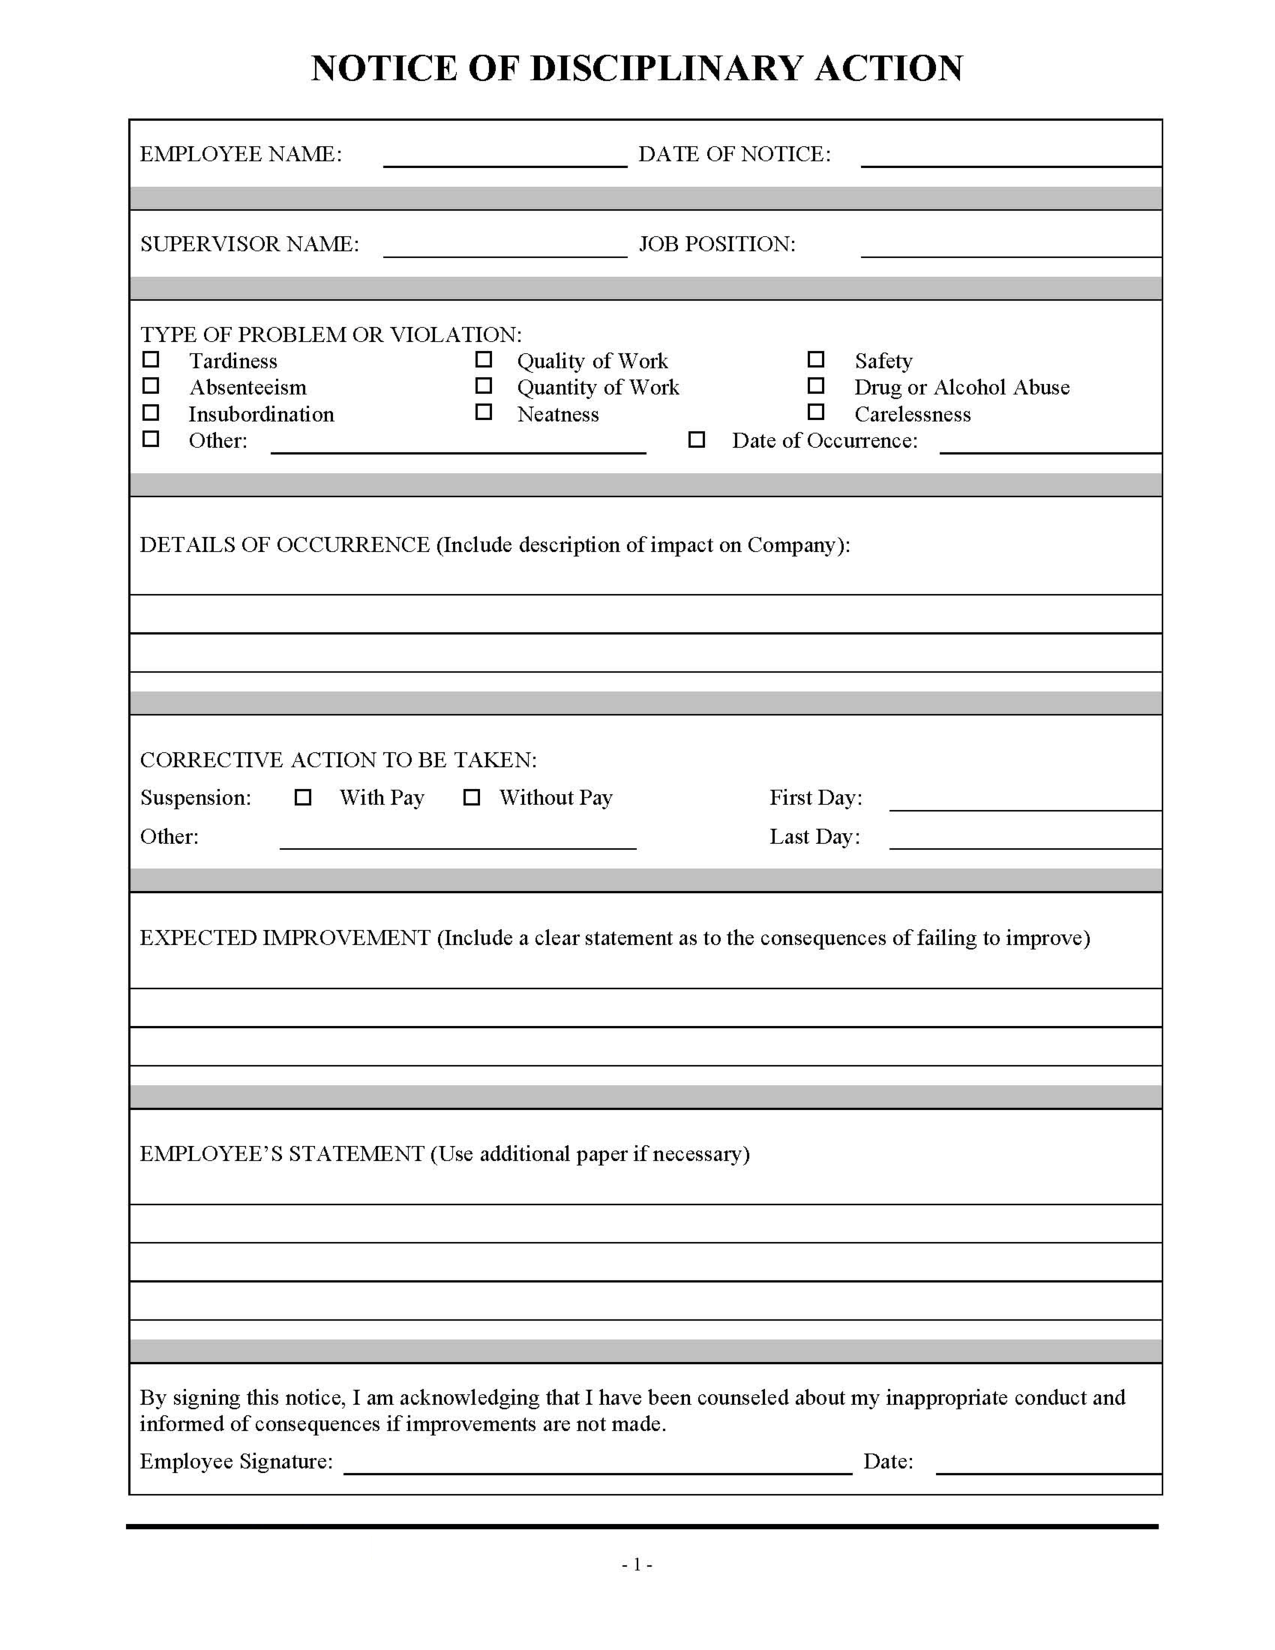 free employee discipline forms   Ecza.solinf.co